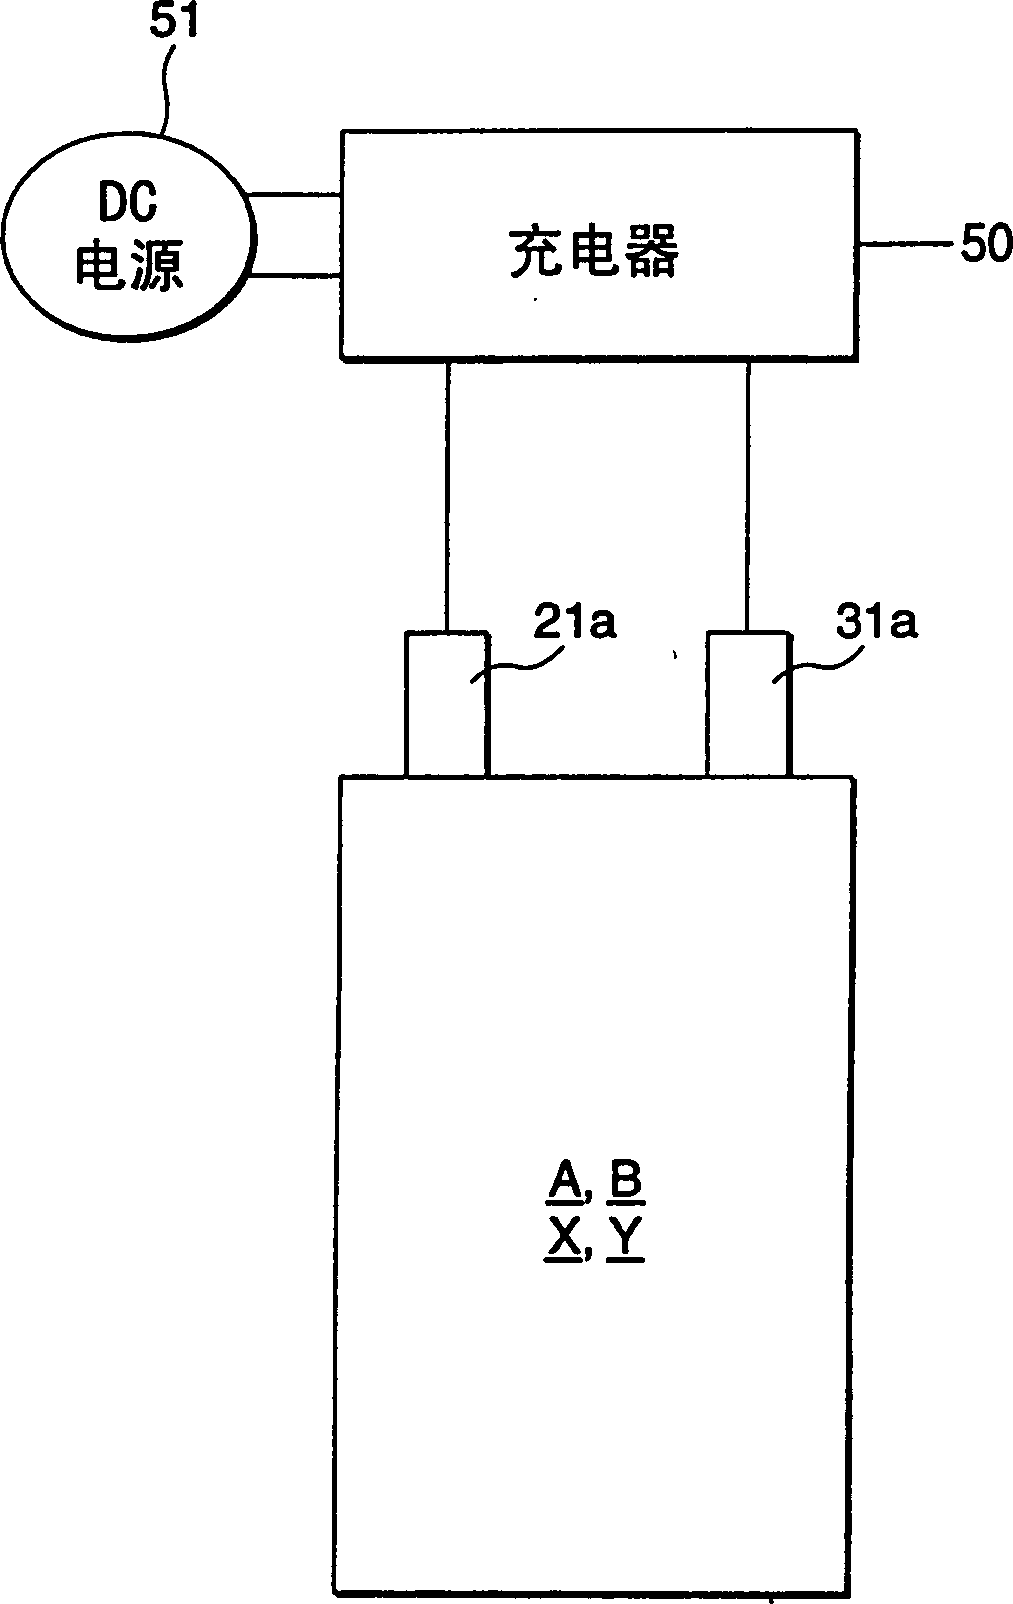 Lithium battery and battery apparatus having said battery